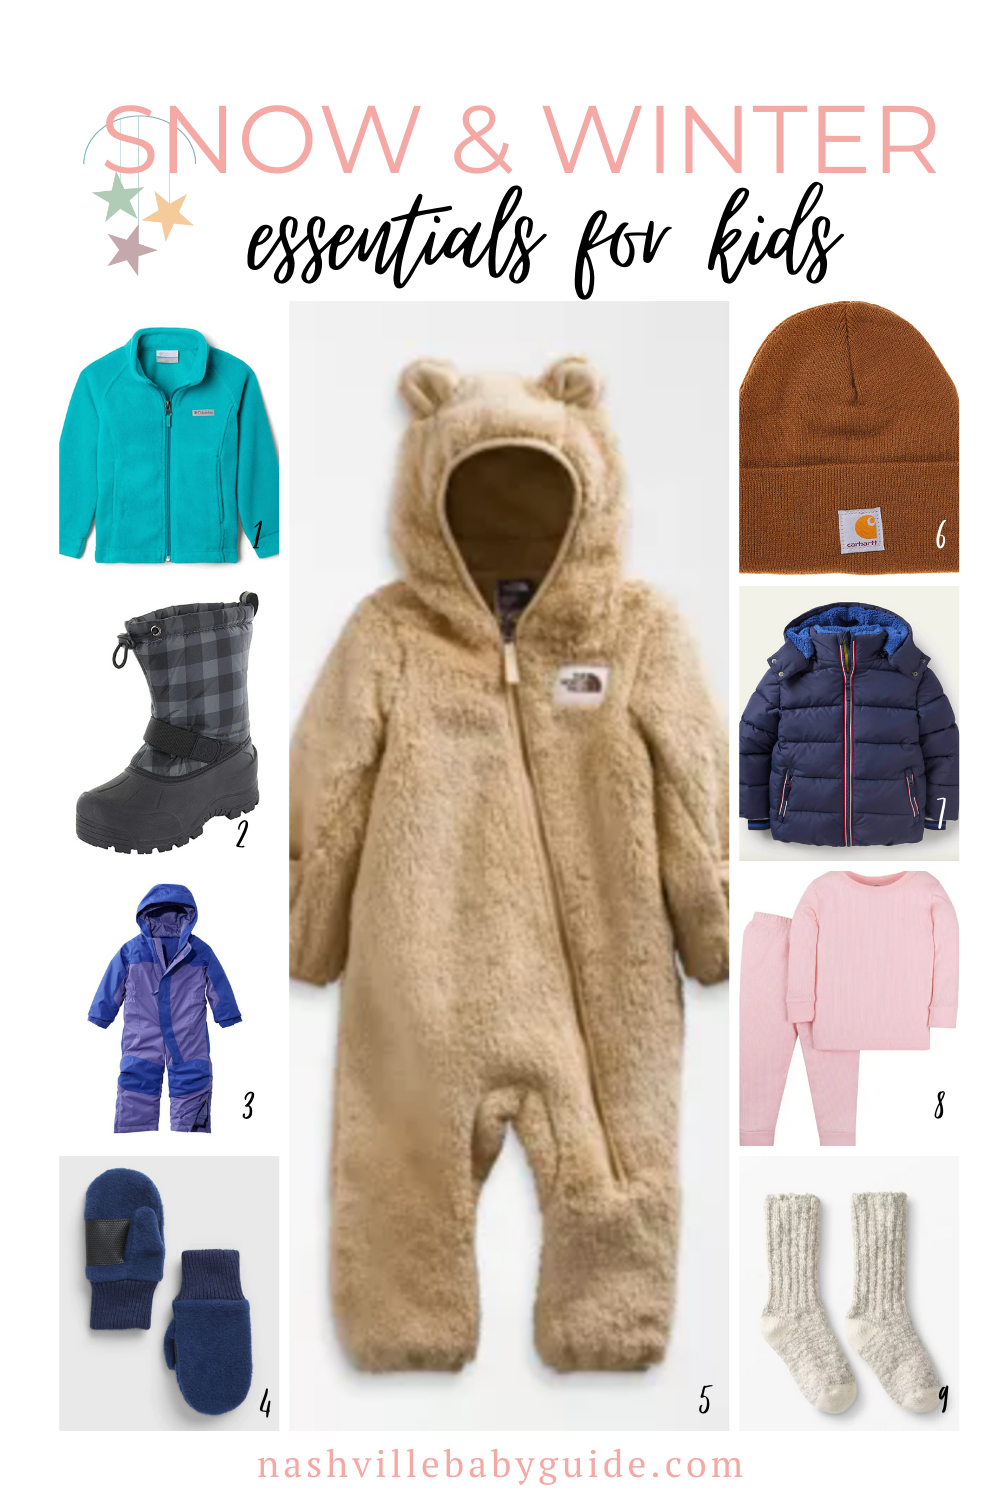 Best Snow and Winter Gear for Kids | Nashville Baby Guide